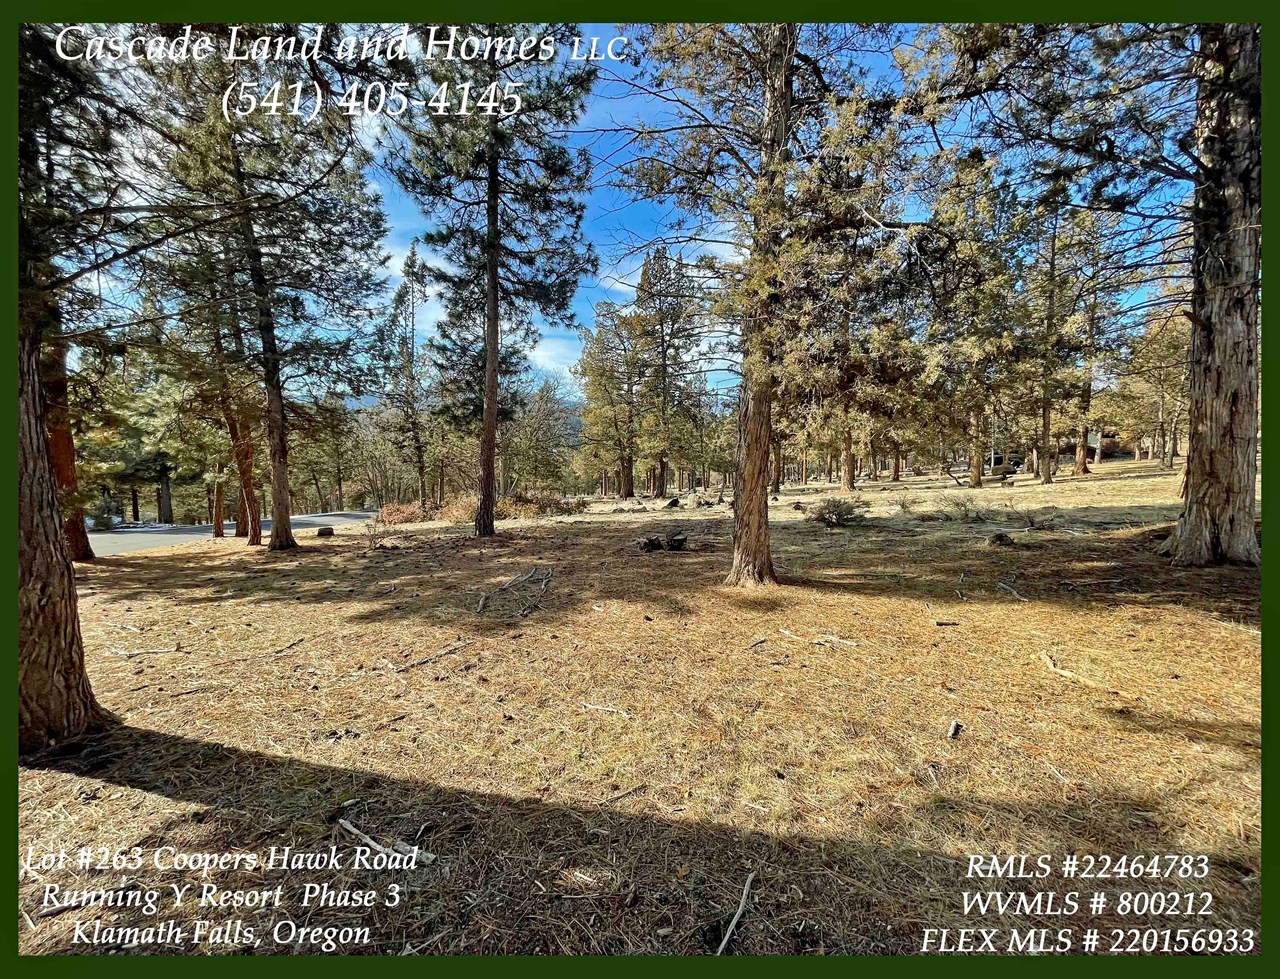 tall, mature ponderosa and juniper trees cover the property offering shade, privacy and the ambiance of being out in forest in a mountain resort community!